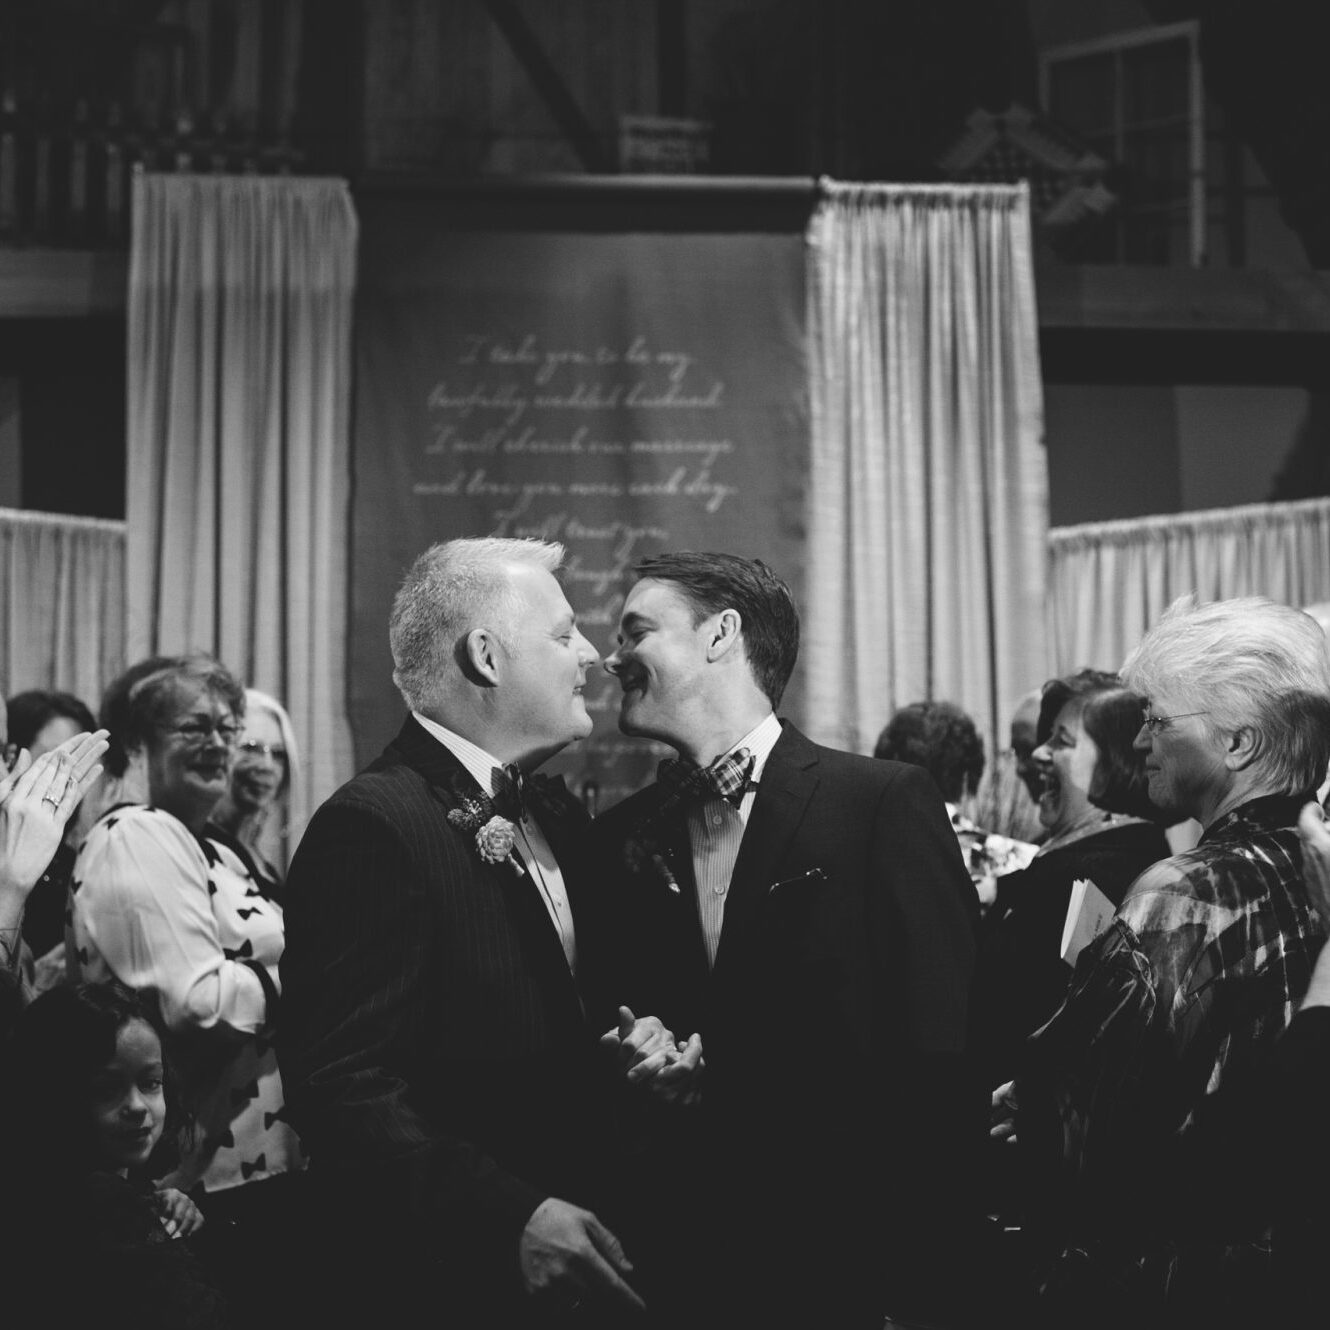 Black and white photograph of LGBT wedding with two grooms about to kiss after their ceremony and stopping in the aisle